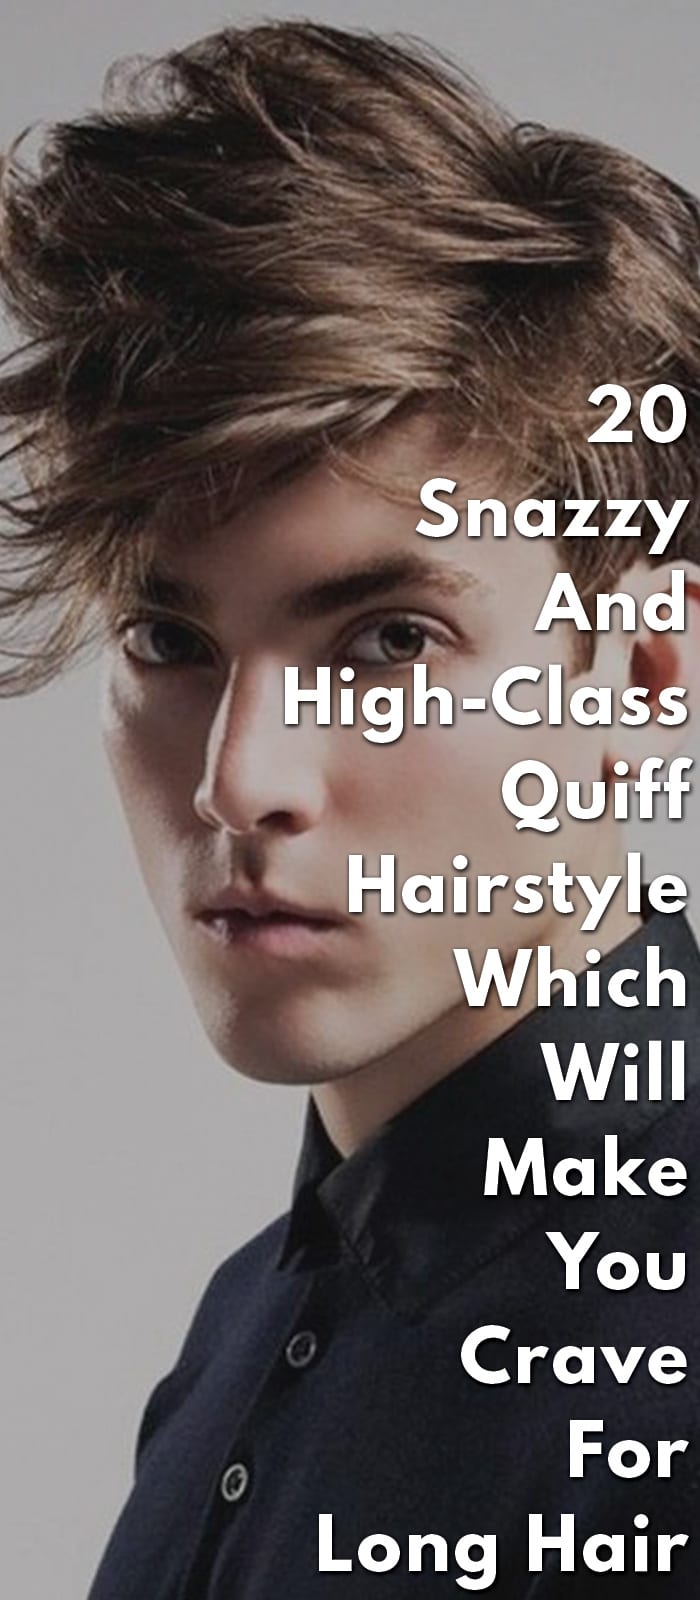 20-Snazzy-and-High-Class-Quiff-Hairstyle-Which-Will-Make-You-Crave-for-Long-Hair